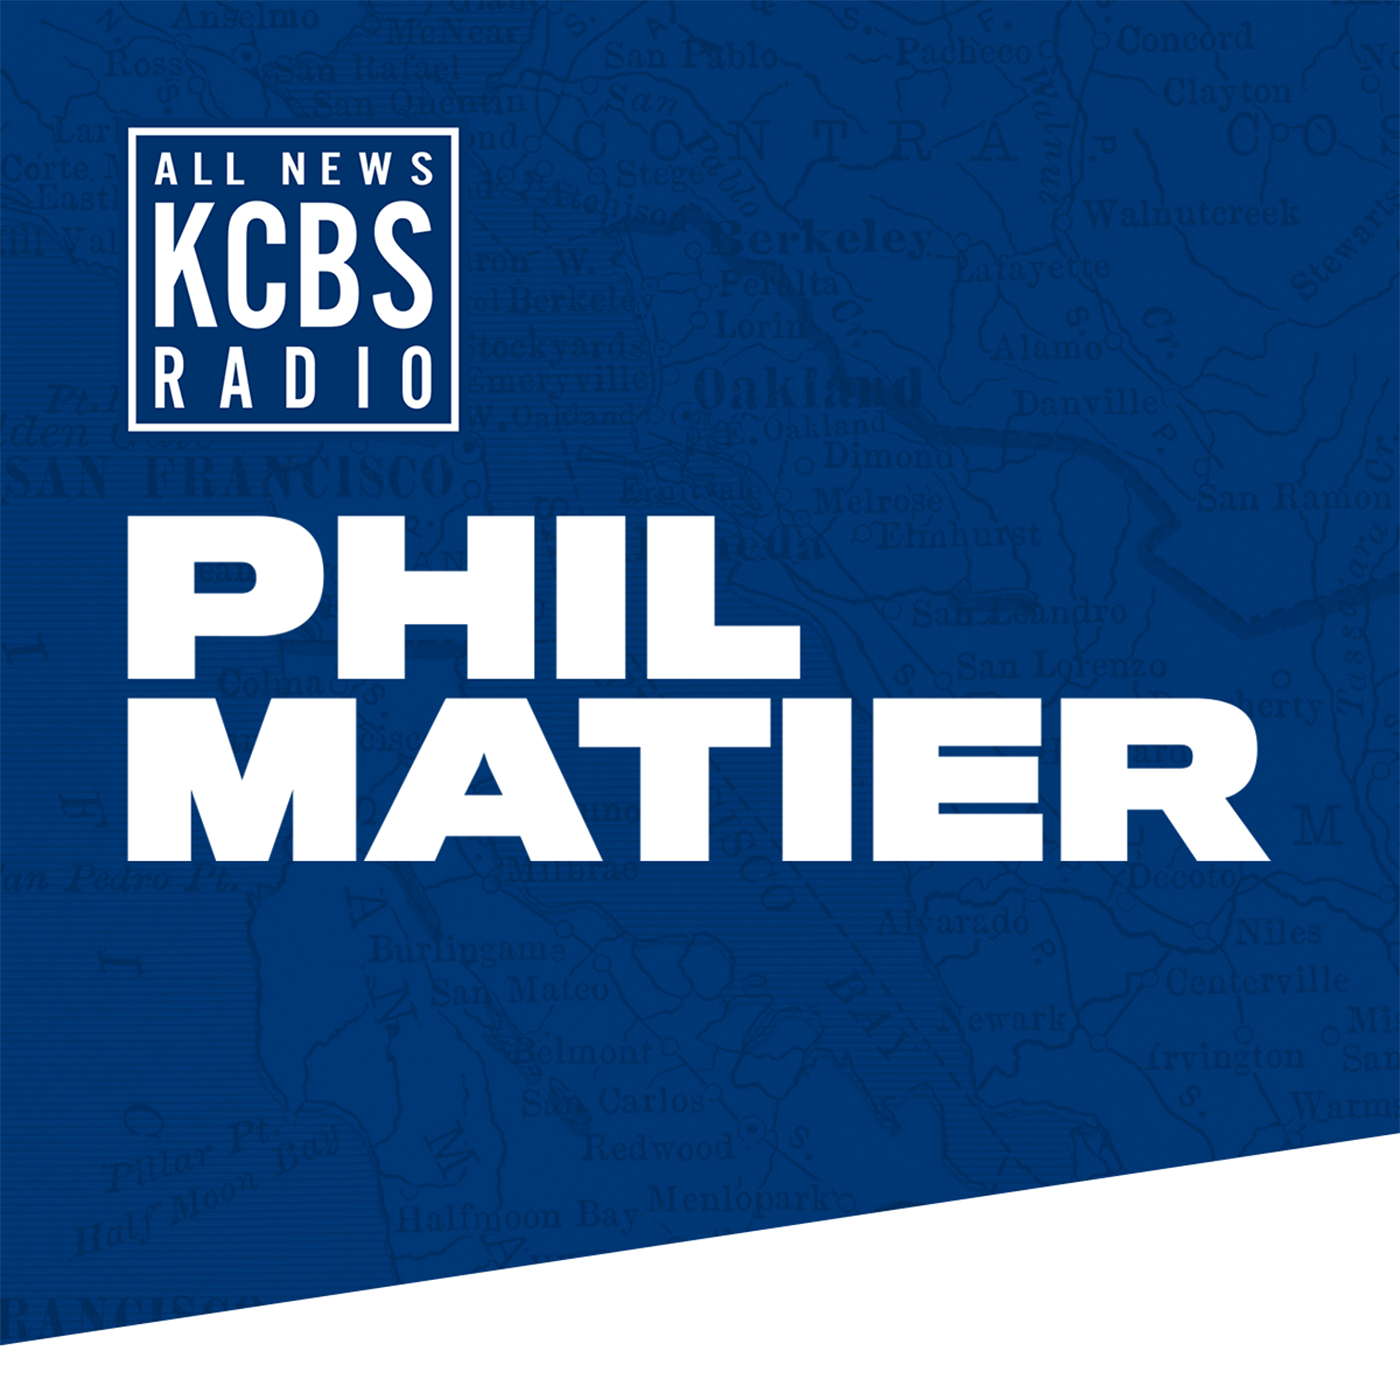 Phil Matier: Crime Numbers Are Down in San Francisco